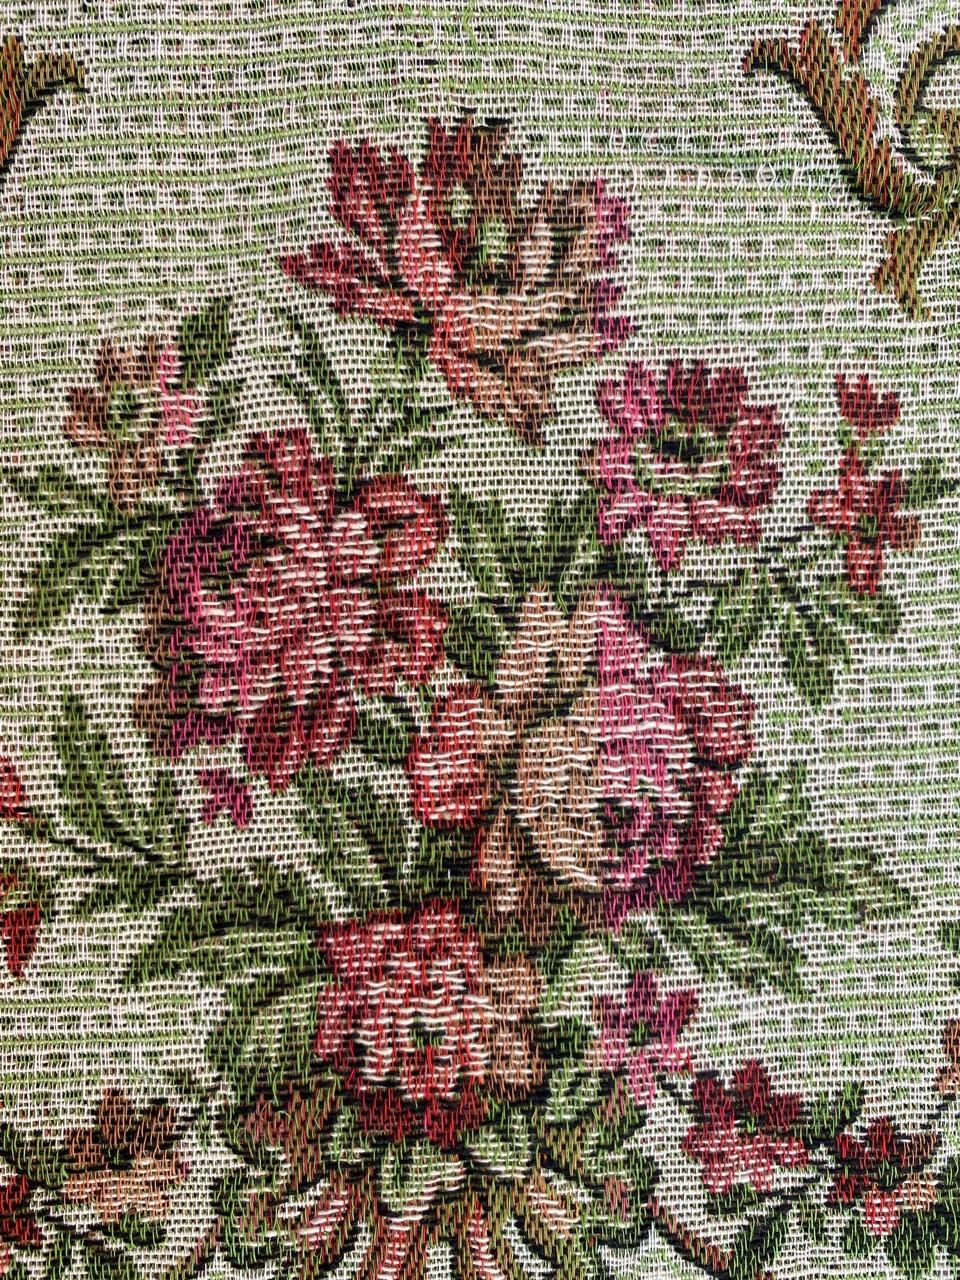 Beautiful long tissue for upholstery with a floral design and nice colors. Mechanical Jaquar made.